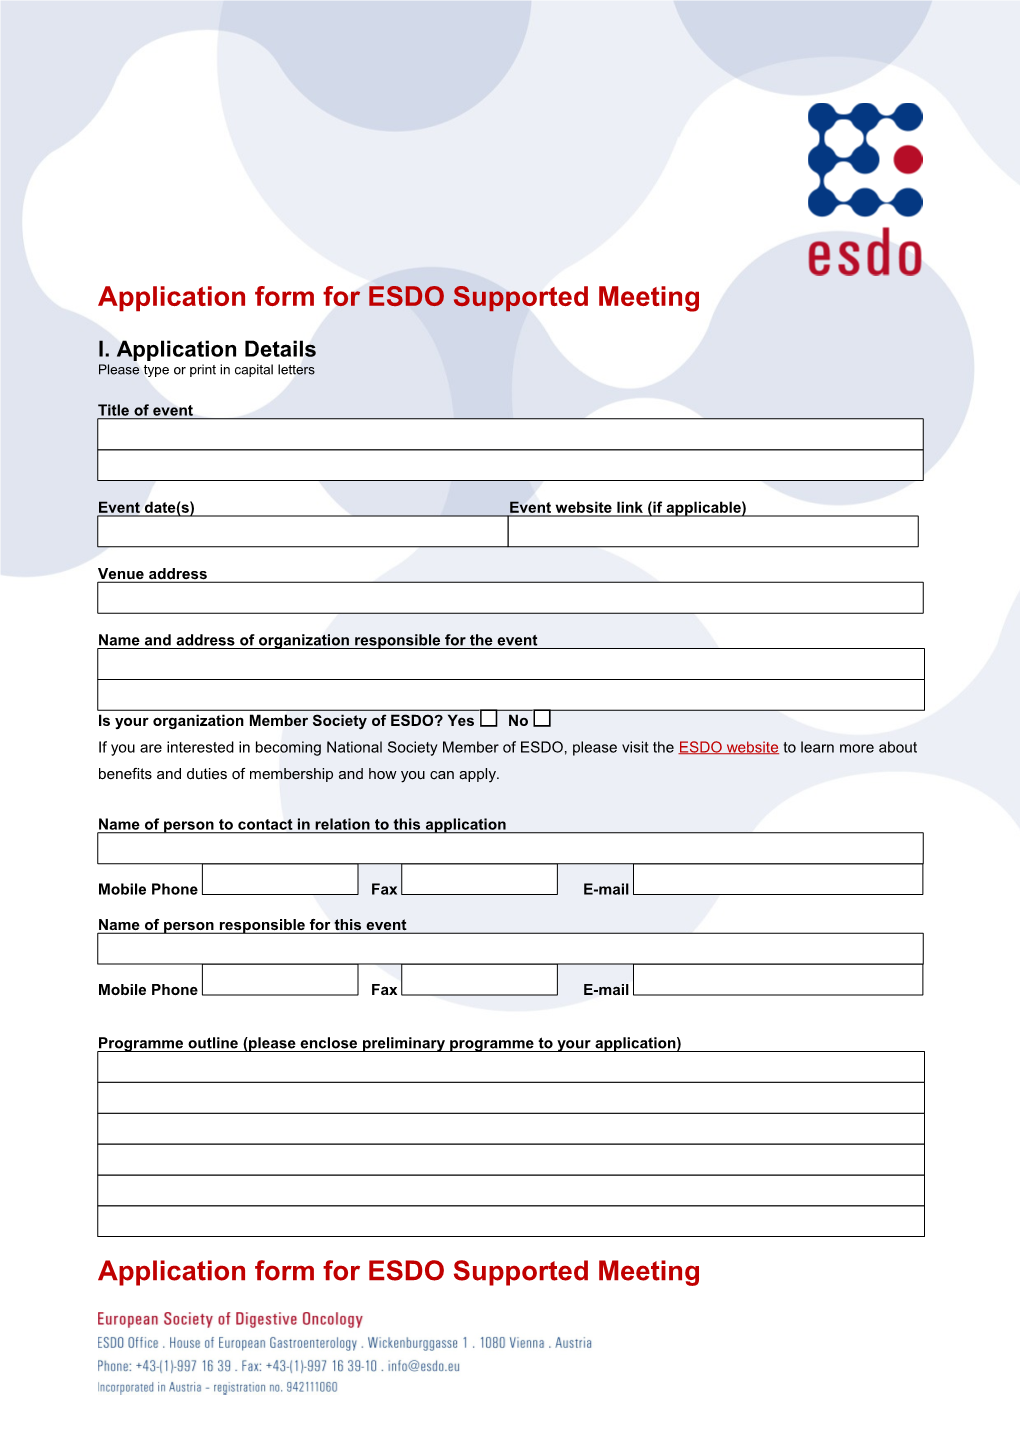 Application Form for ESDO Supported Meeting